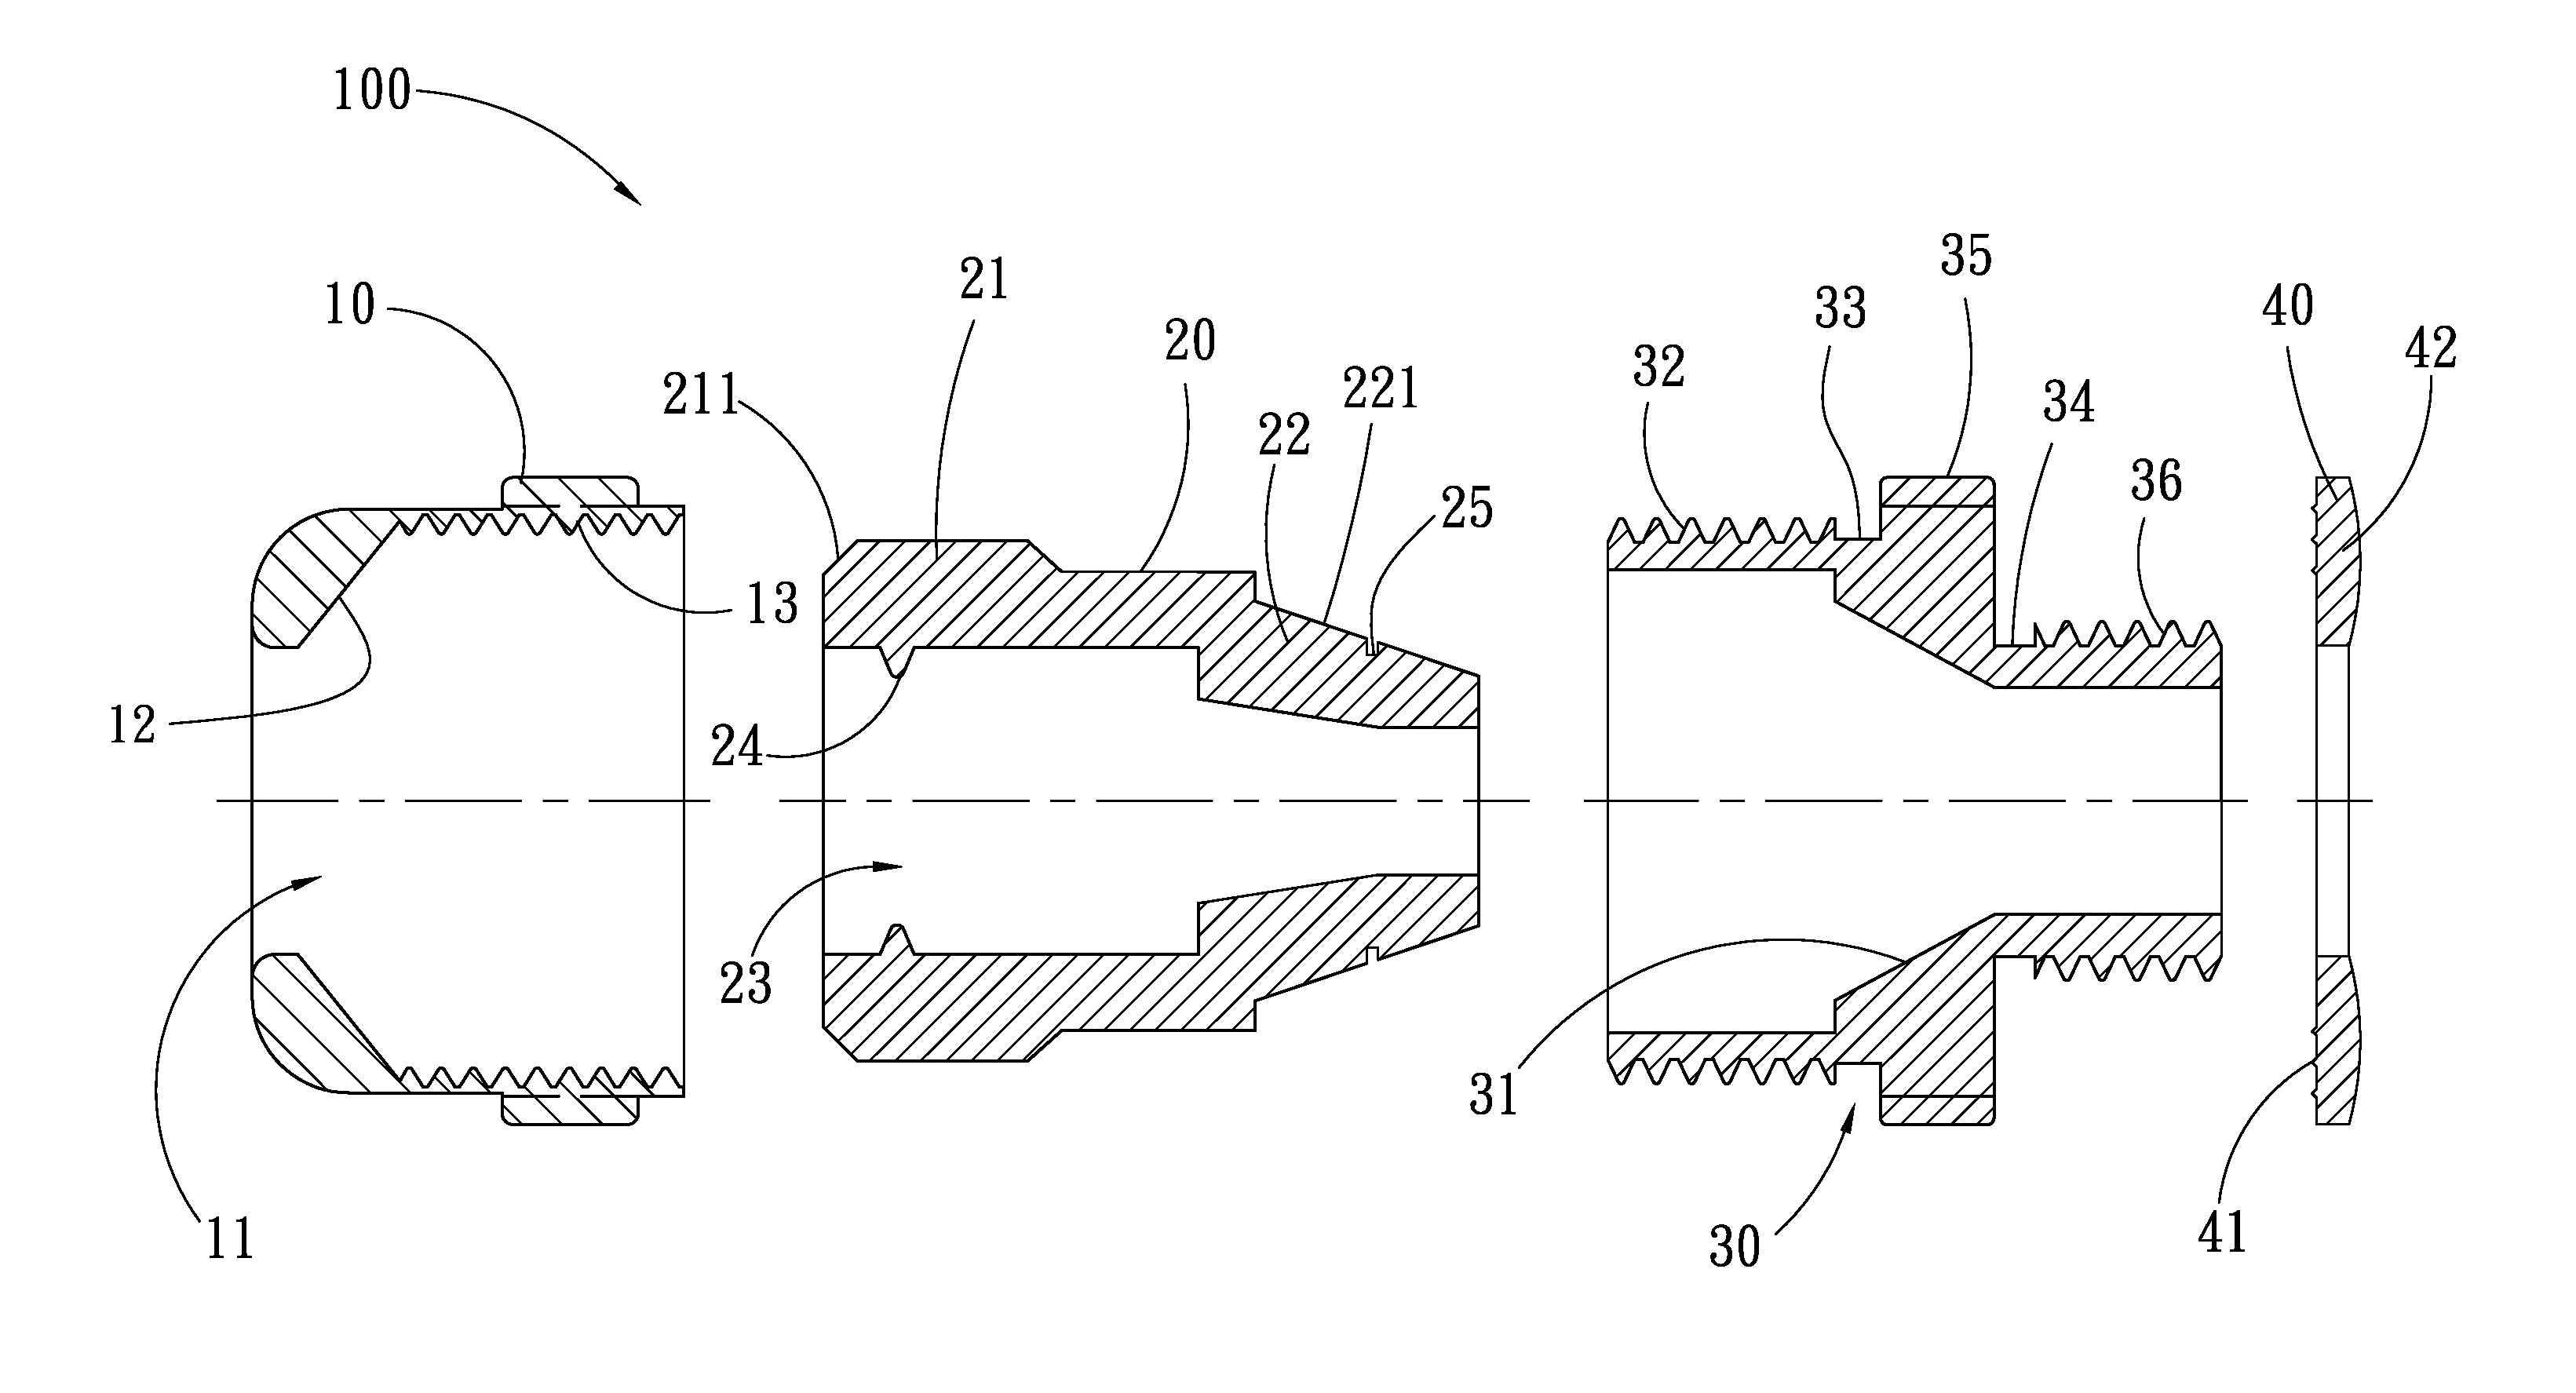 Double-packing cable and flexible conduit gland